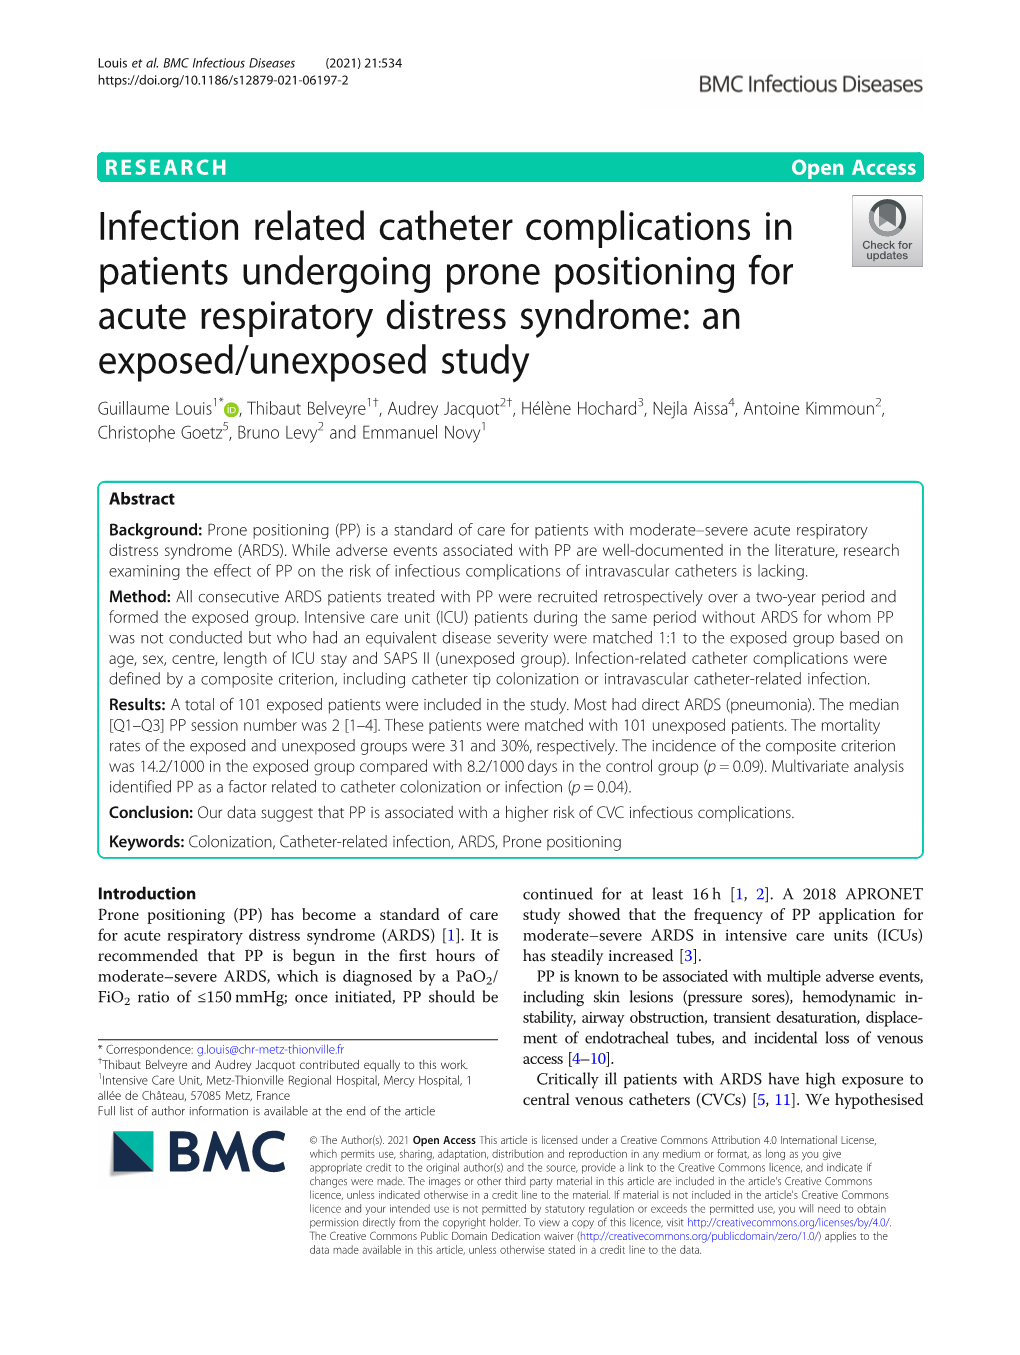 Infection Related Catheter Complications in Patients